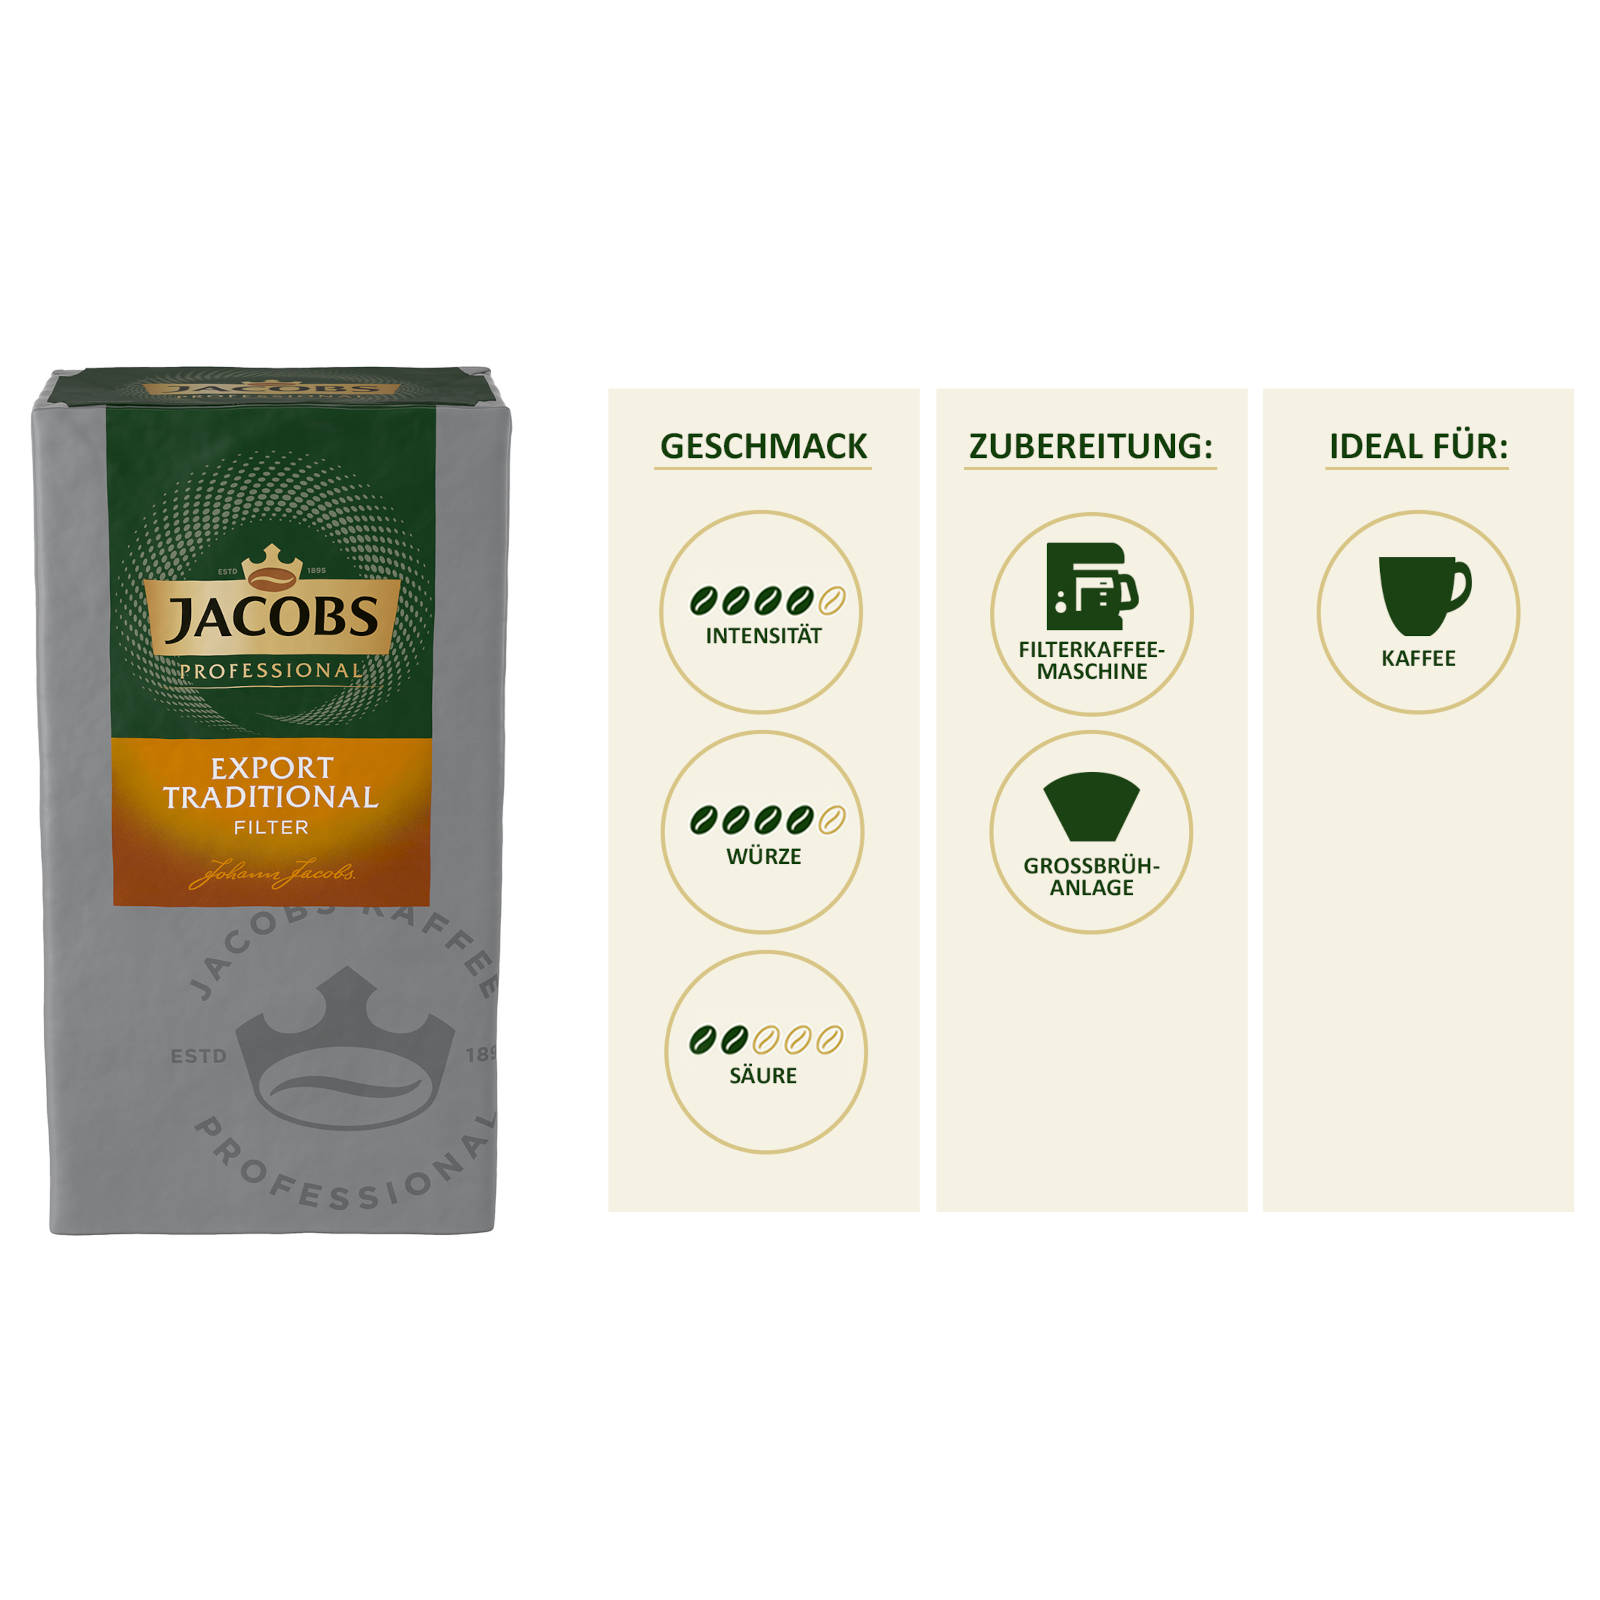 JACOBS Professional Export Traditional Filterkaffee 12x500 (Filter, French g Press)